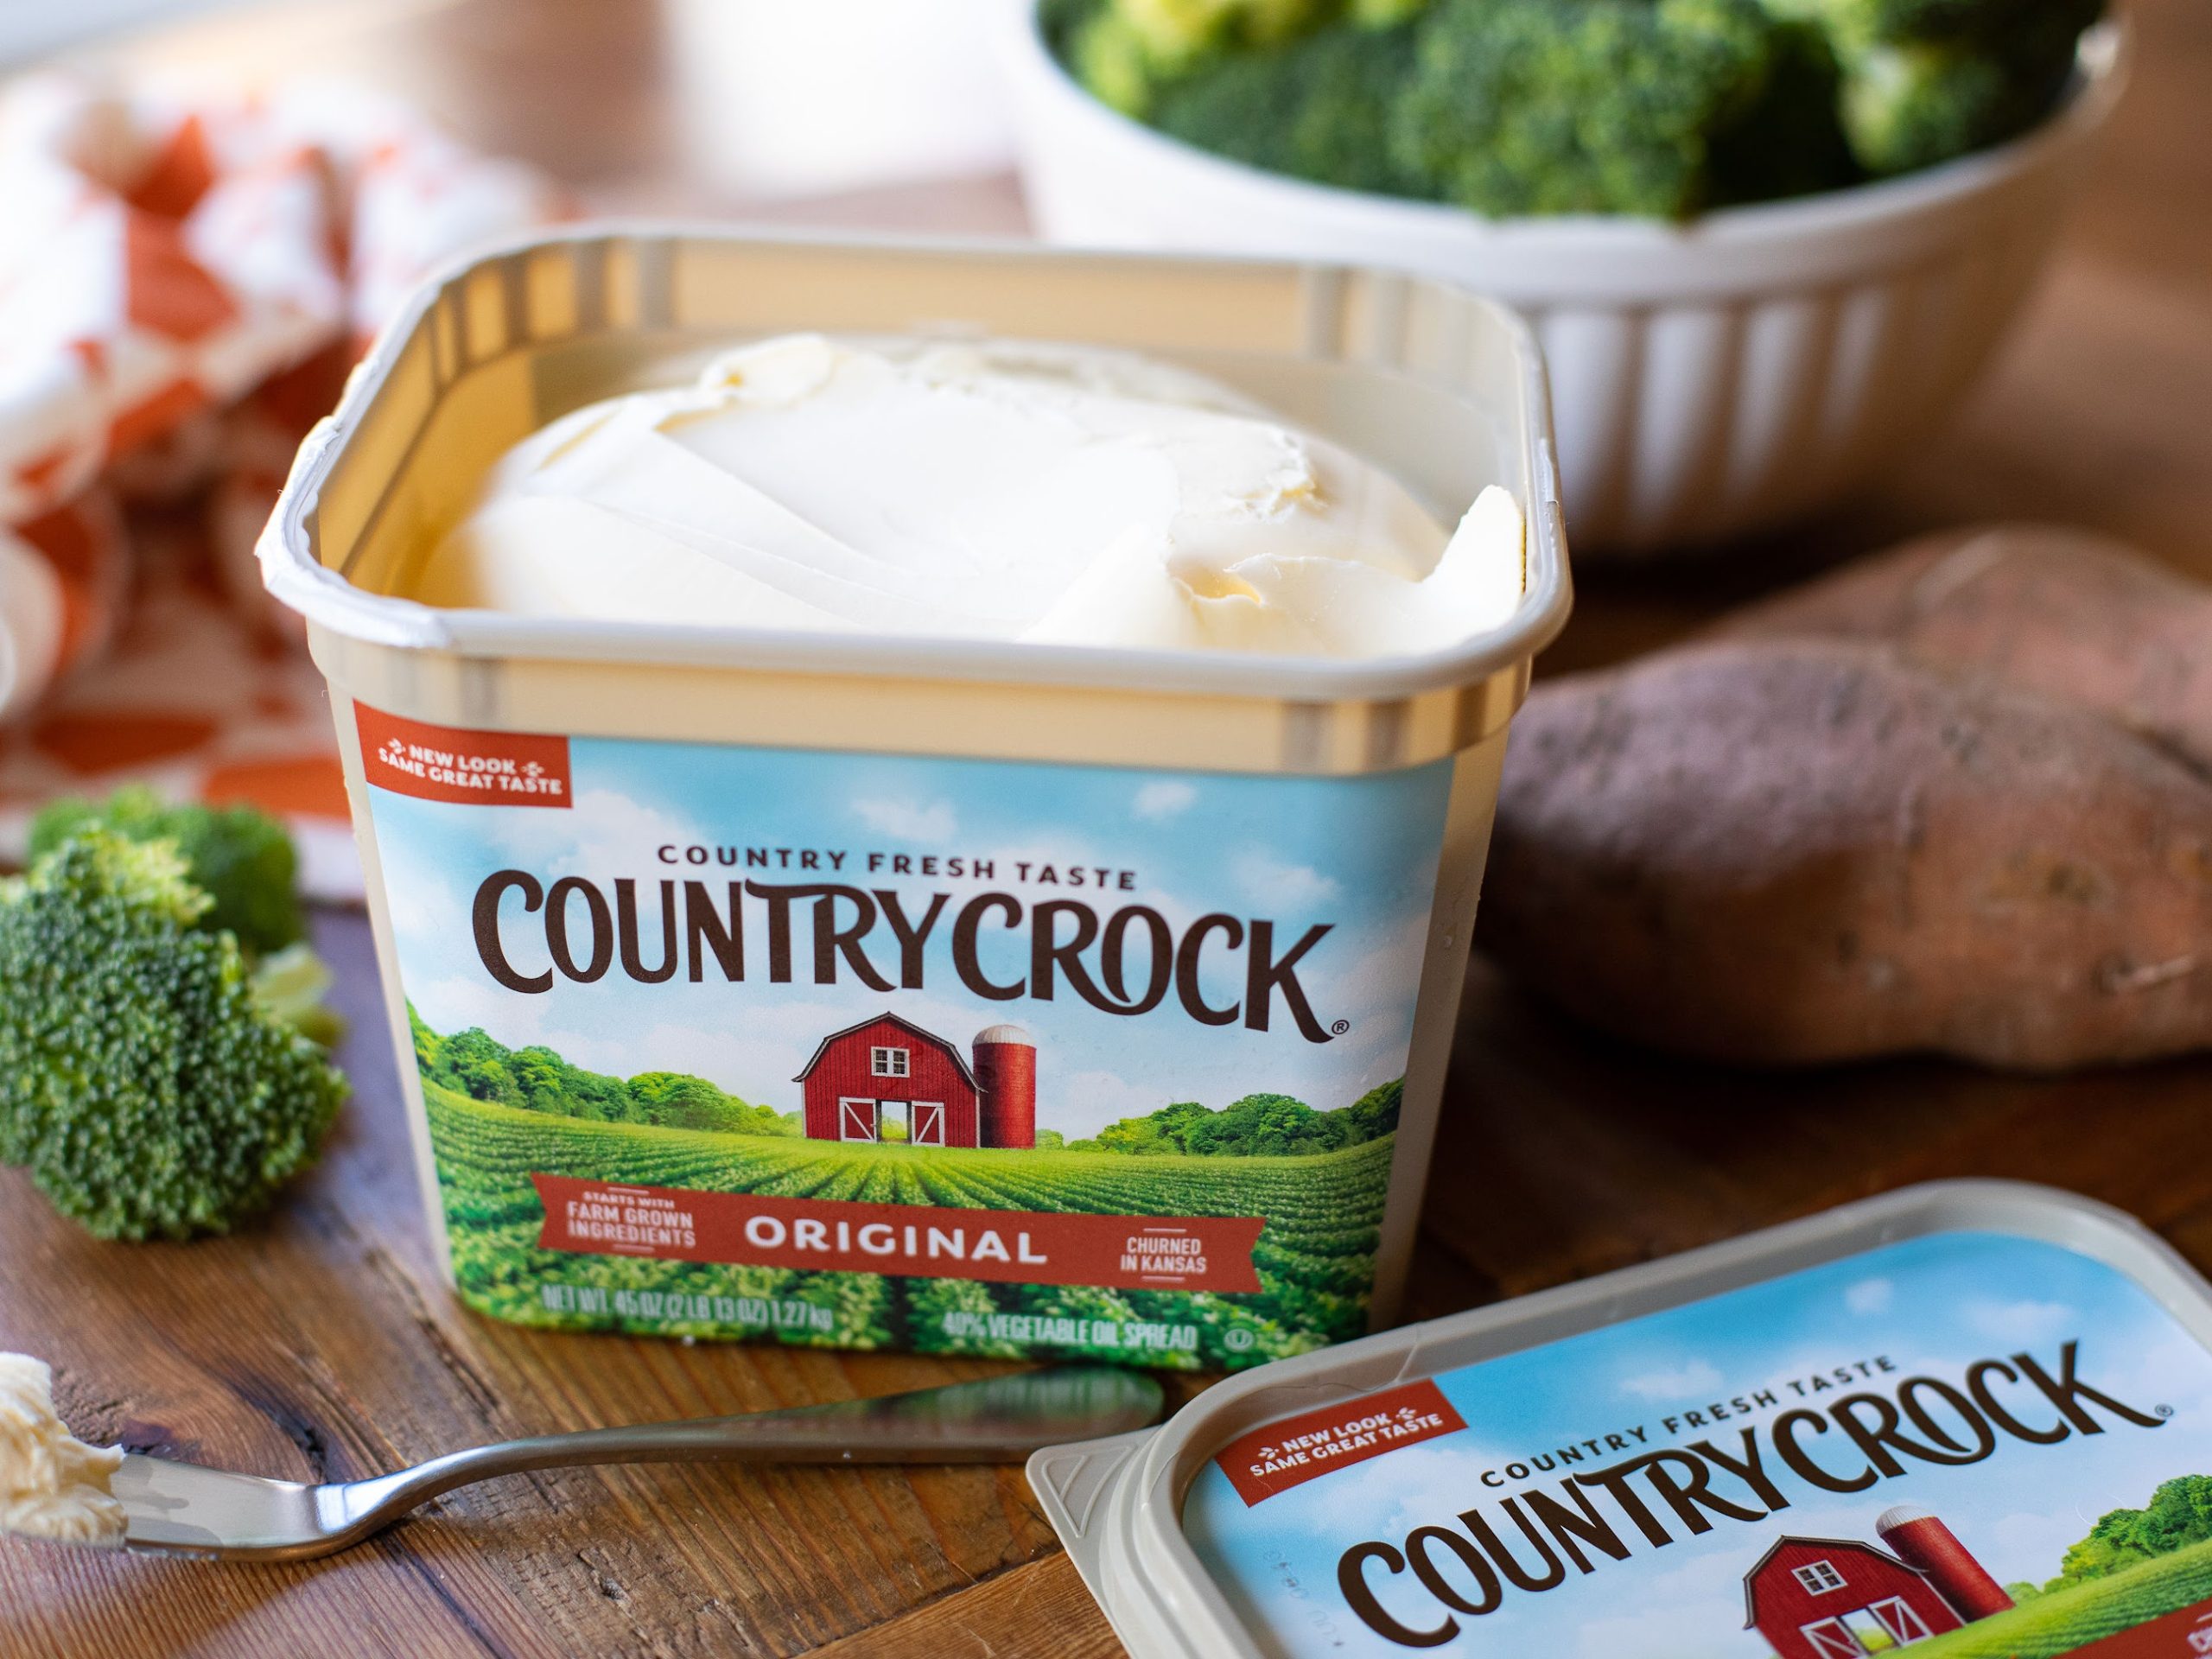 Country Crock Spread As Low As $2.50 Per Large Tub At Publix